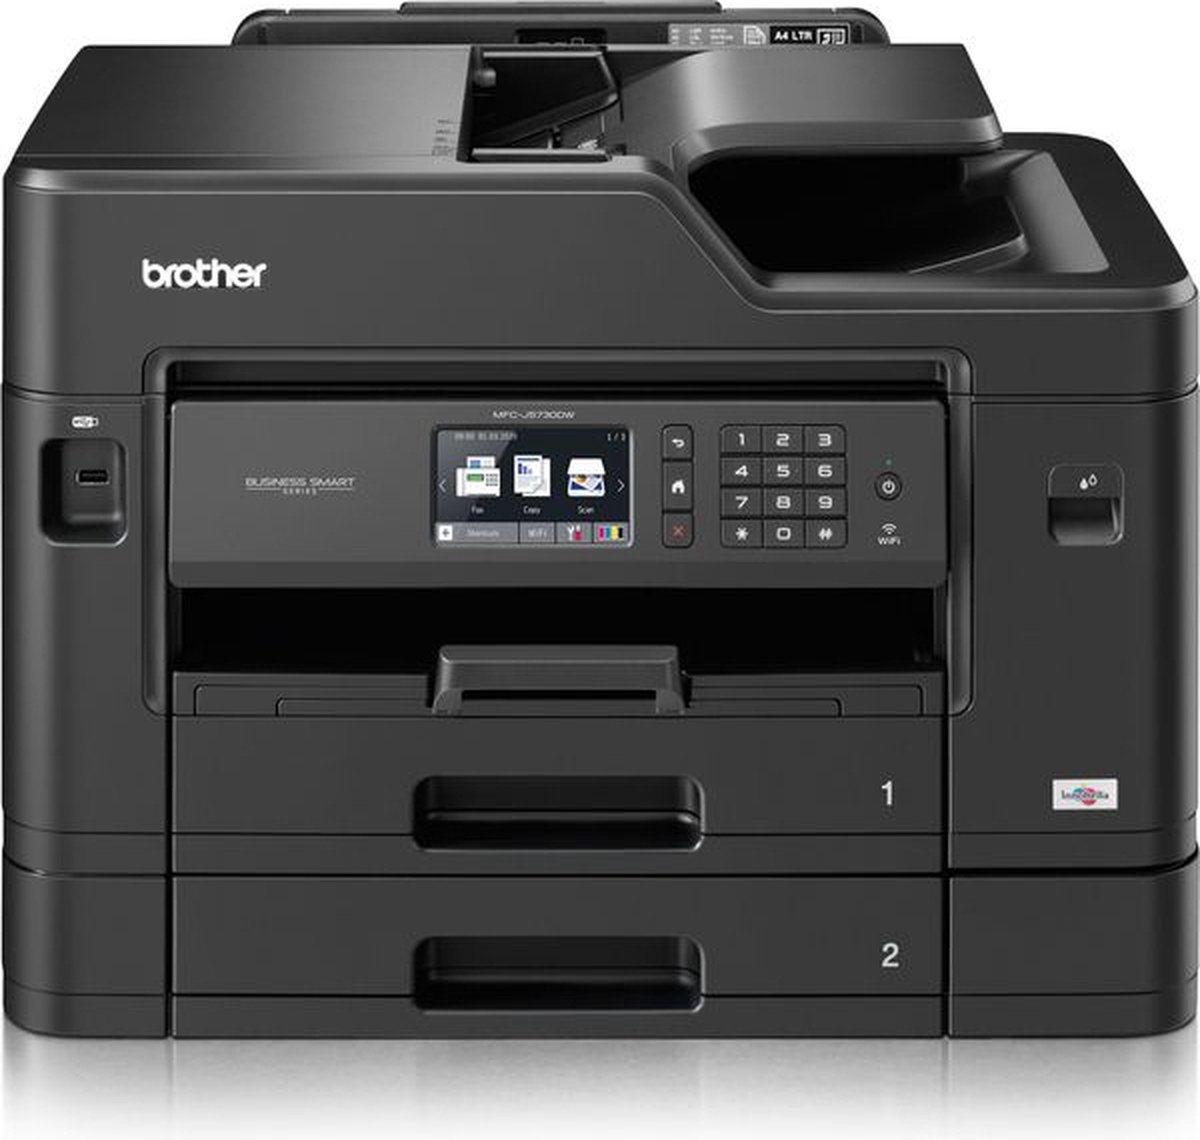 Brother MFC-J5730DW - All-in-One Printer - Brother